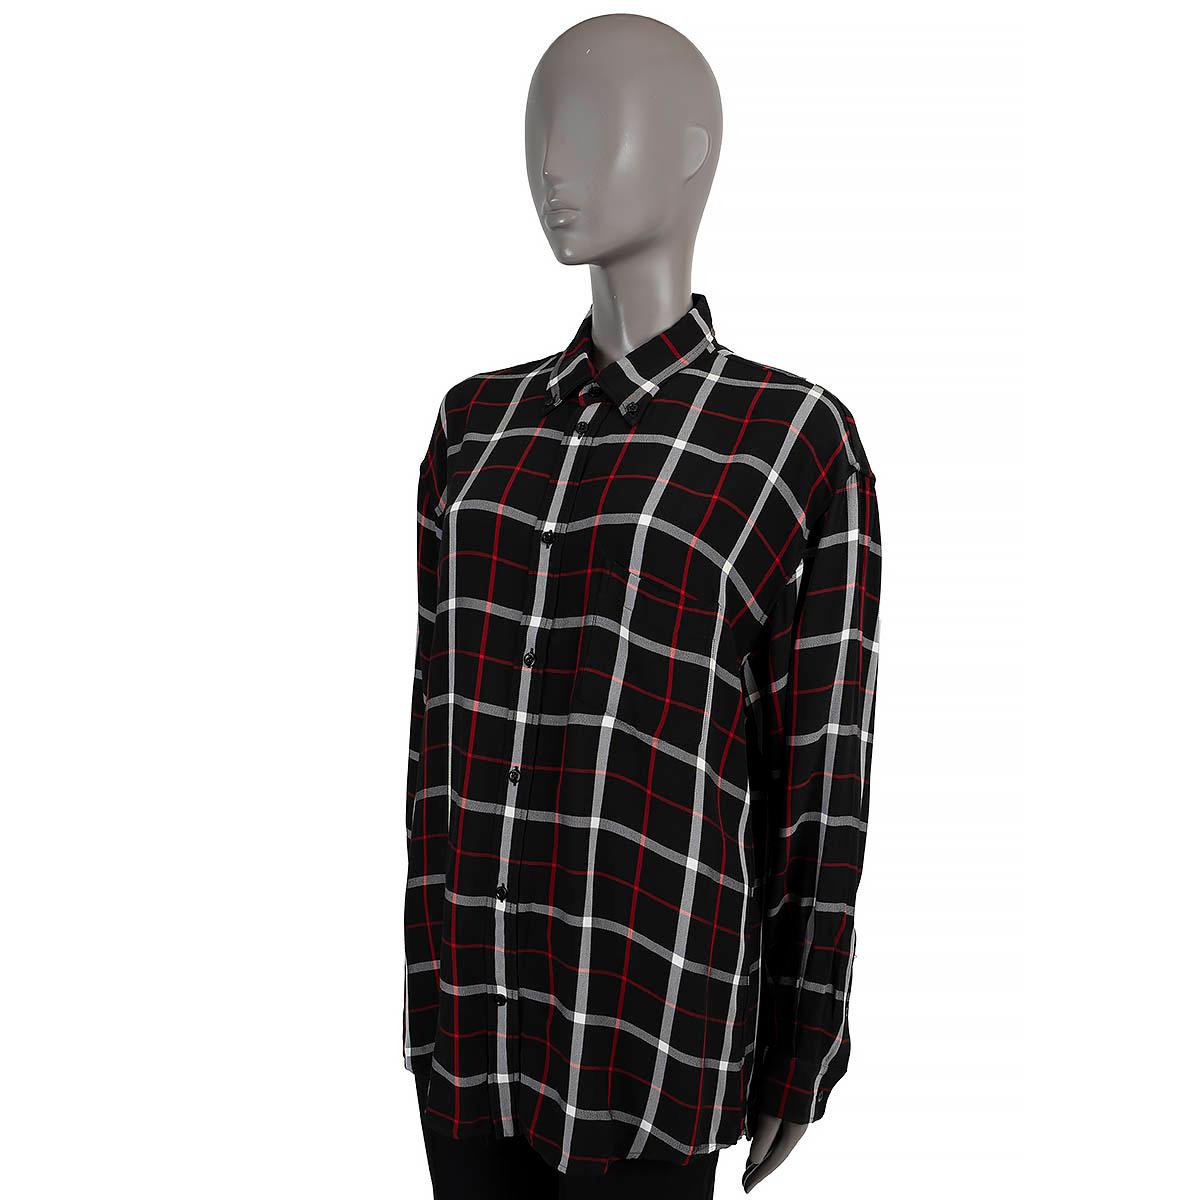 100% authentic Balenciaga logo print plaid shirt in black, white and red viscose (100%). Features a white logo print on the back, buttoned cuffs and a chest-pocket. Have been worn and are in excellent condition.

2019